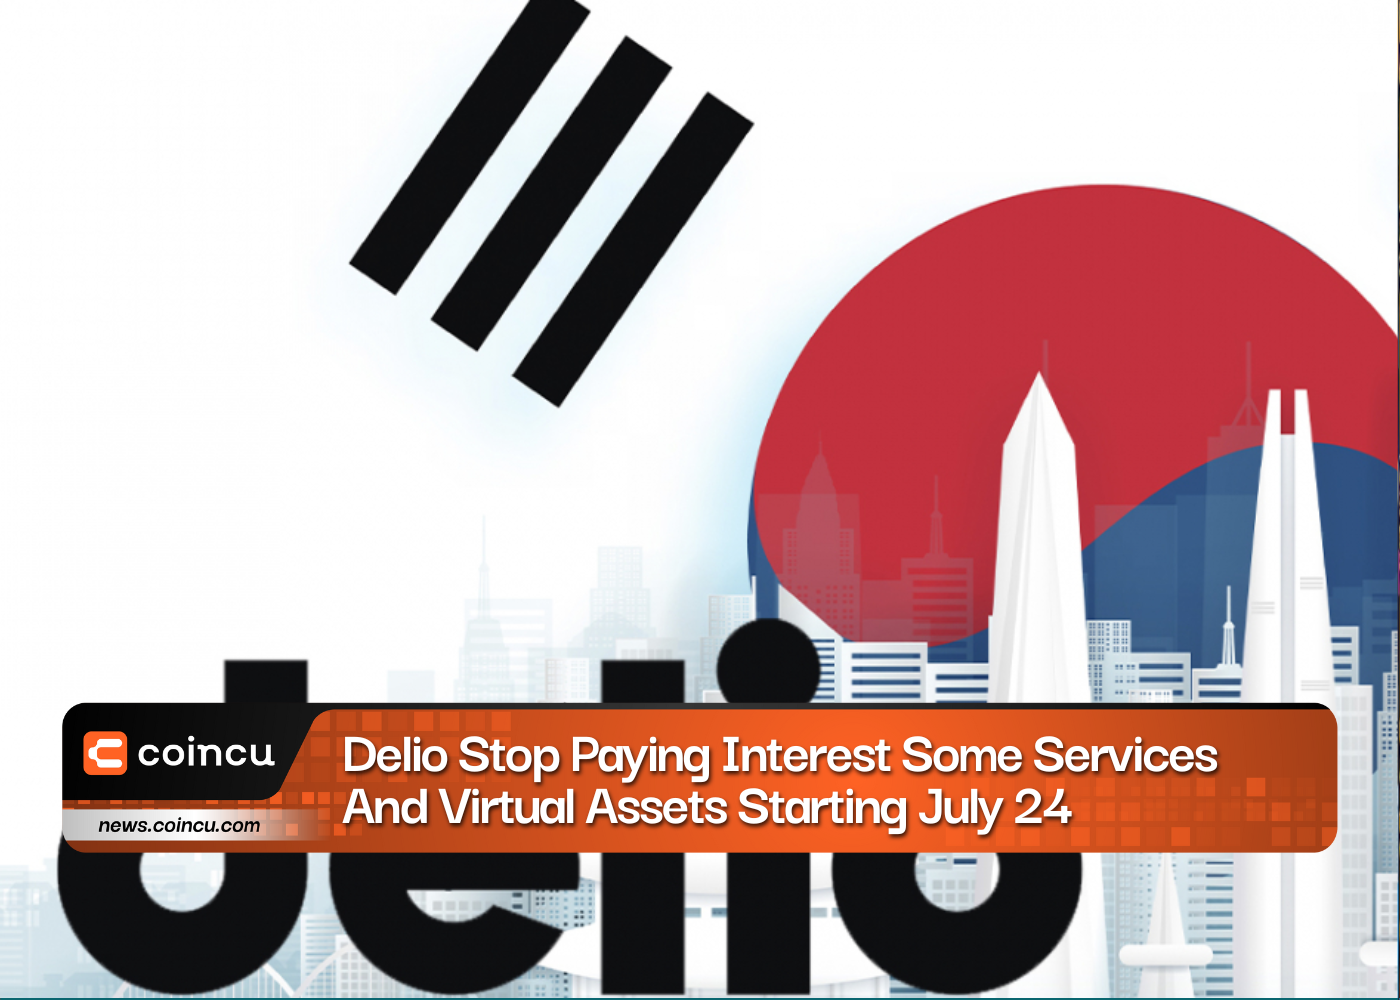 Delio Stop Paying Interest Some Services And Virtual Assets Starting July 24